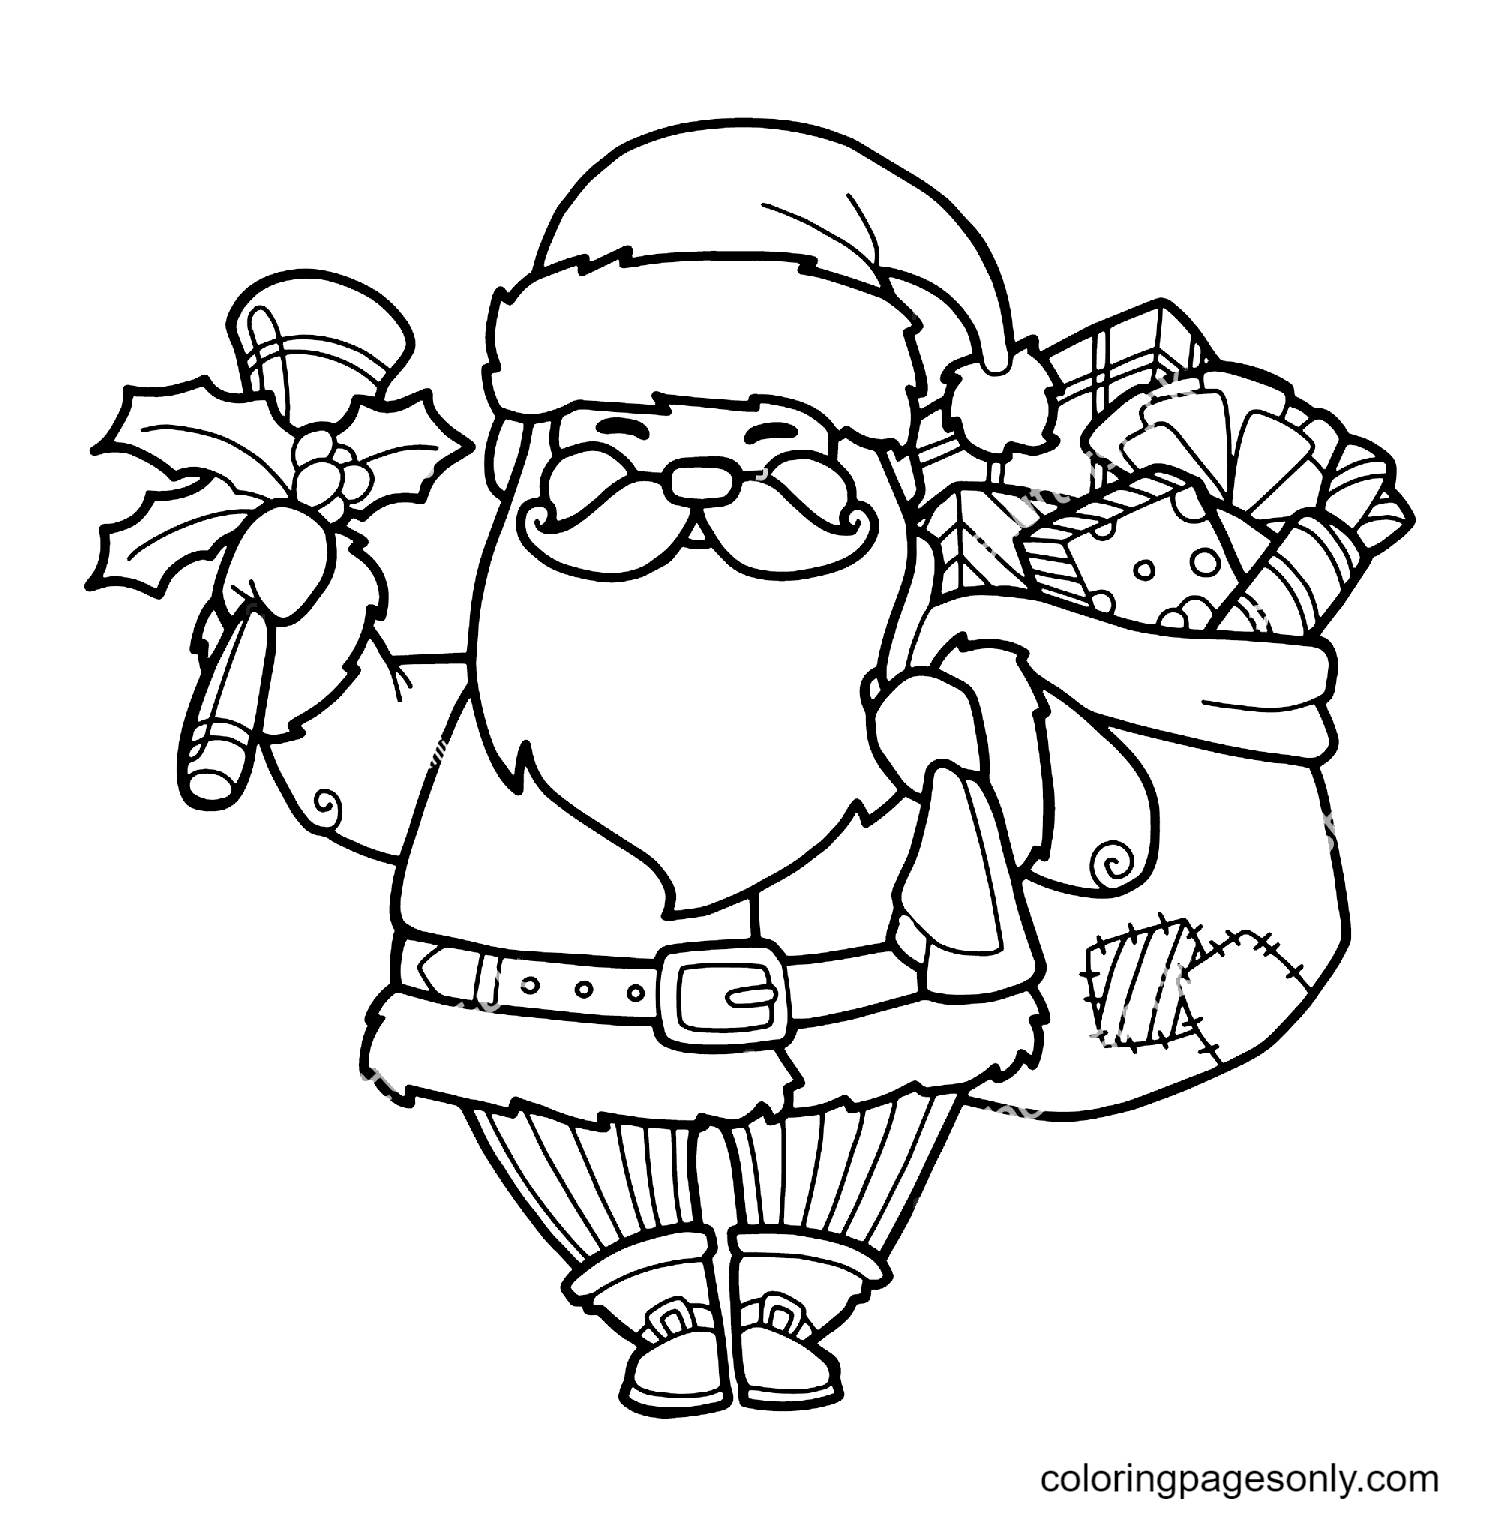 Santa Claus with Gifts from Santa Claus